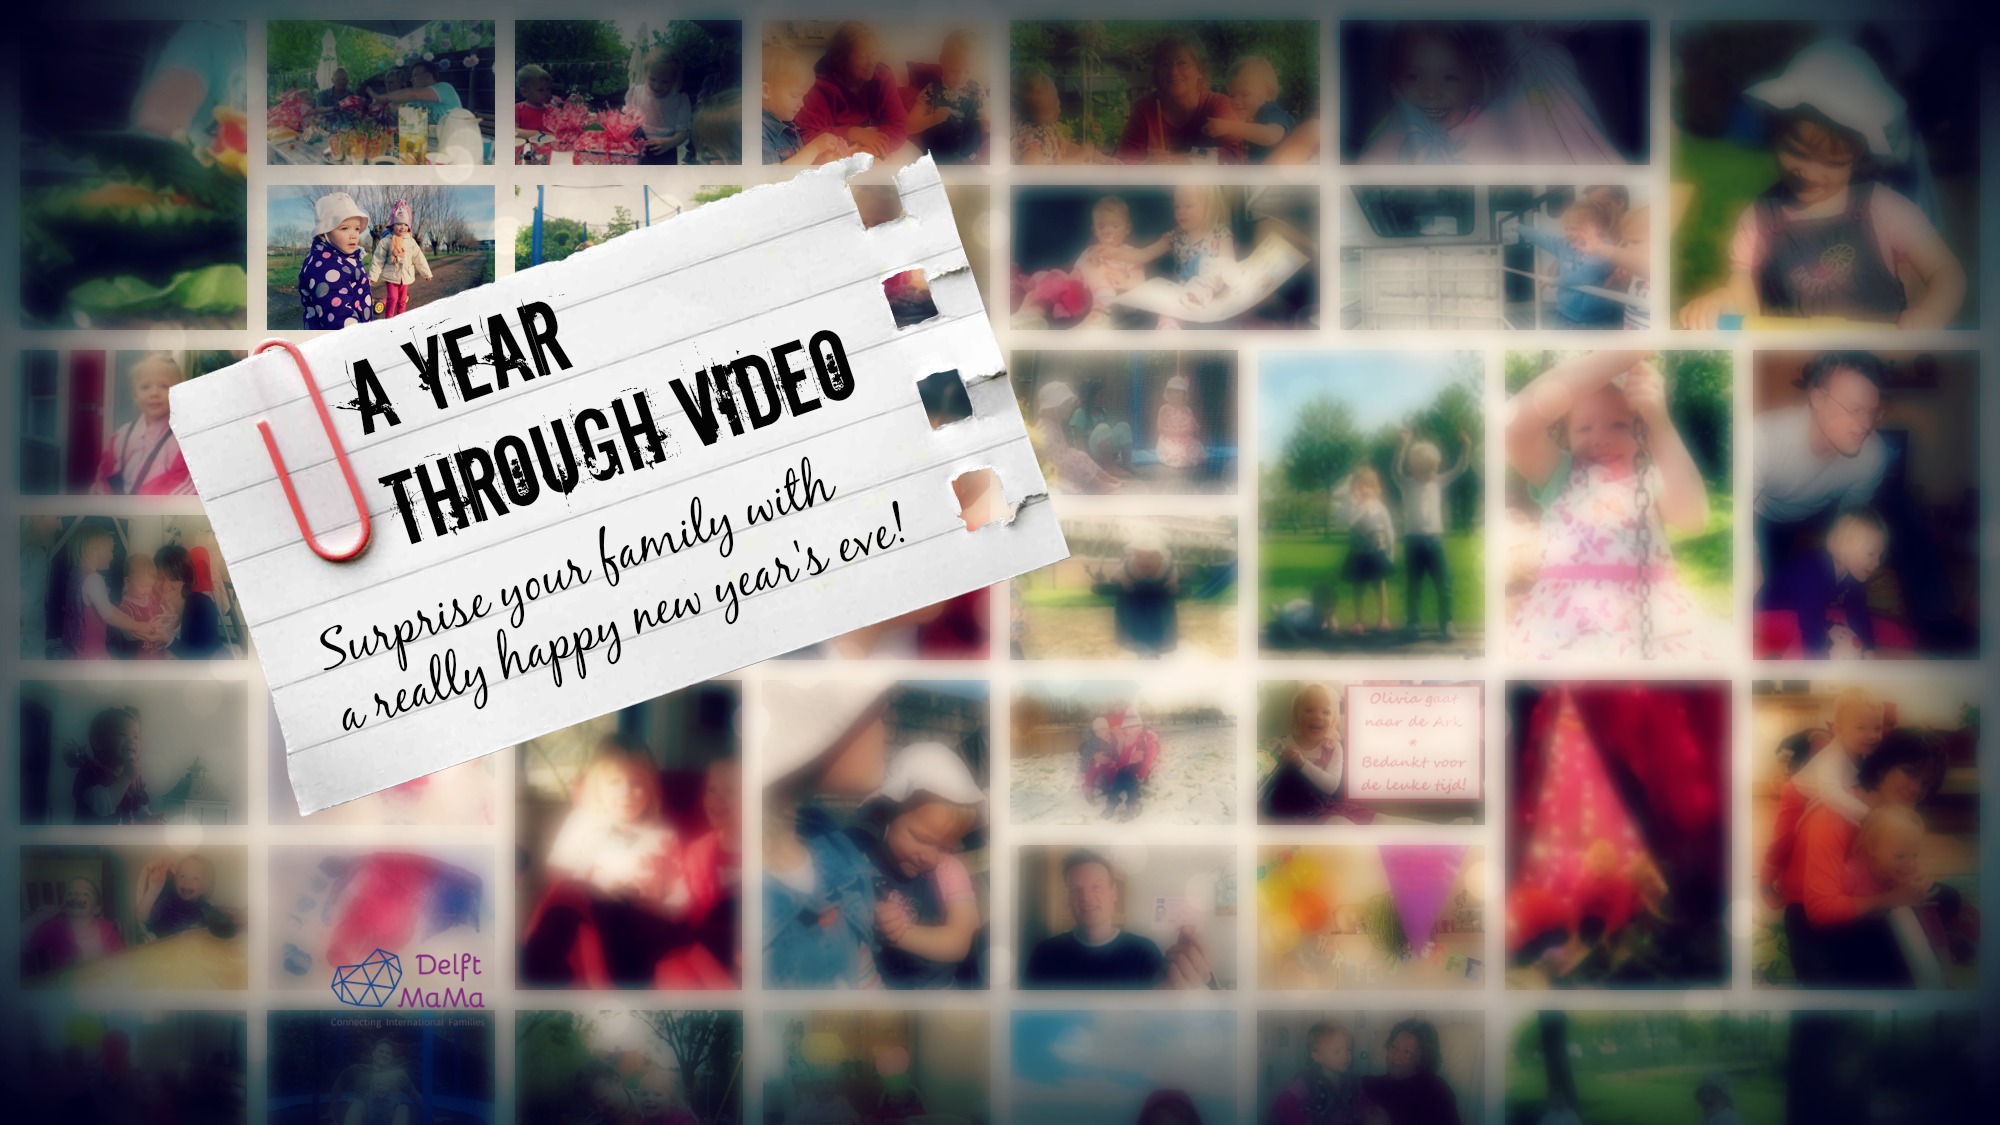 Year Video - show your adventures to your family on new year's eve!